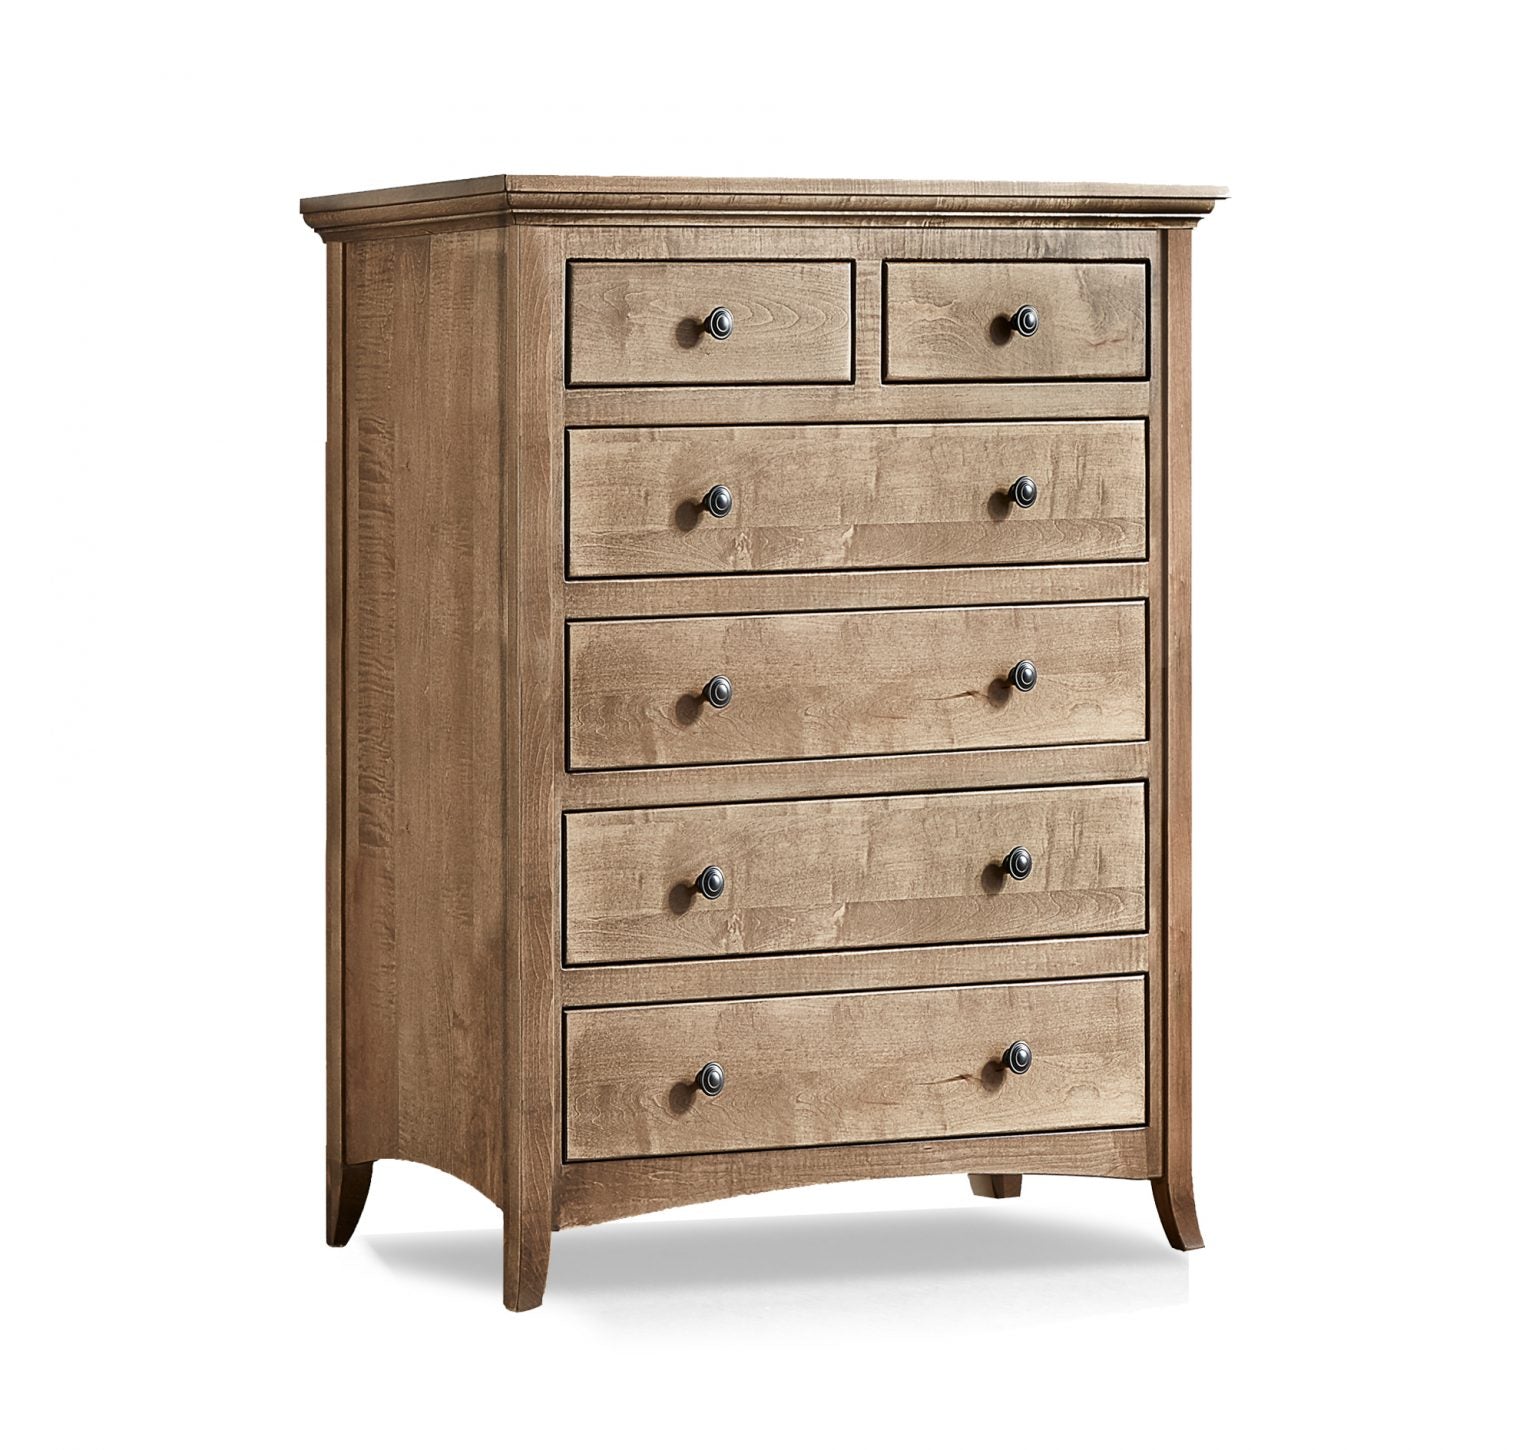 Provence 6 Drawer Chest - Baconco